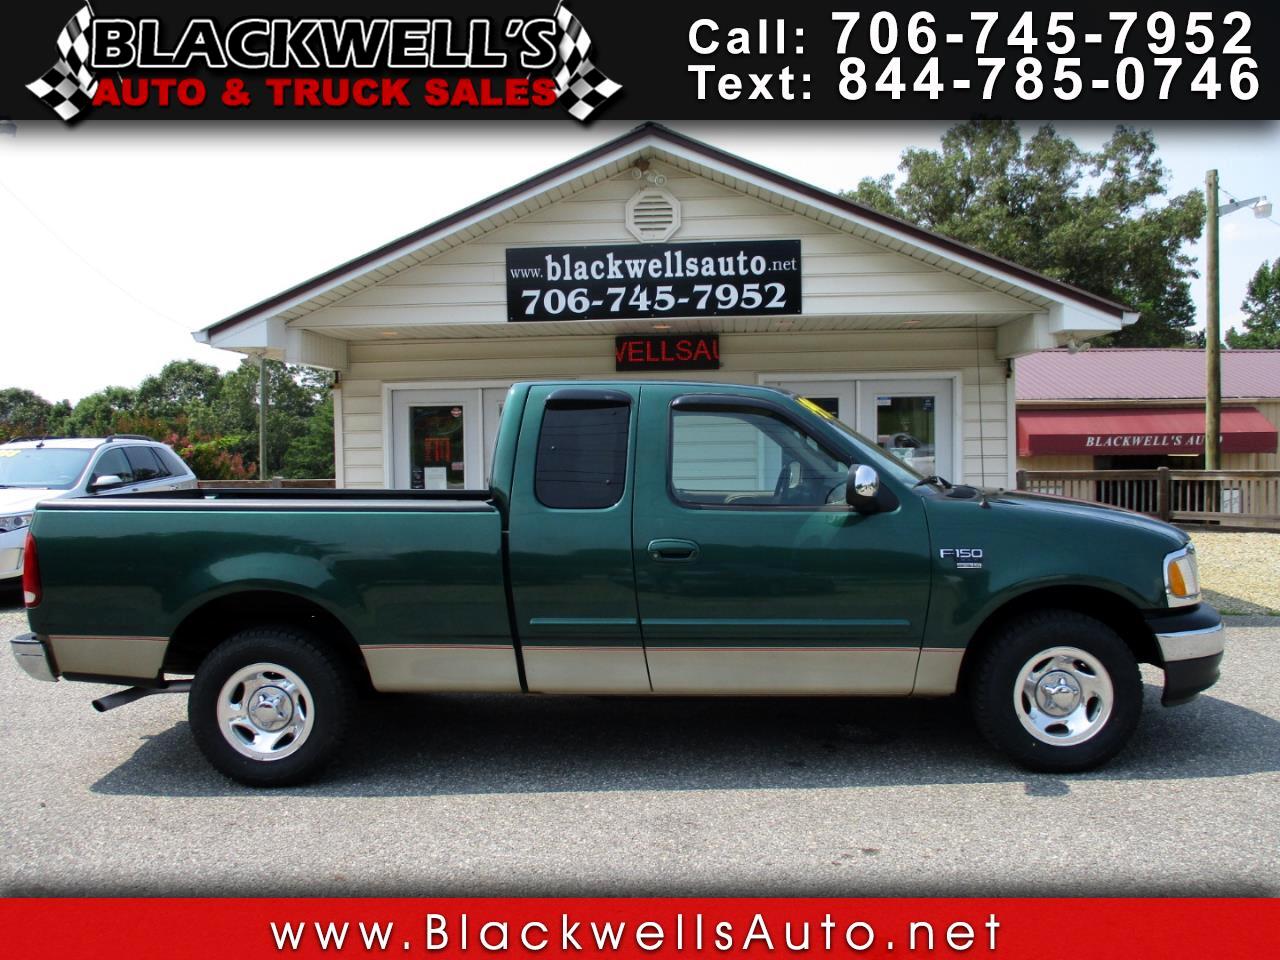 Used 1999 Ford F-150 Supercab 139" XLT for Sale in Blairsville GA 30512 1999 Ford F150 Triton V8 Towing Capacity